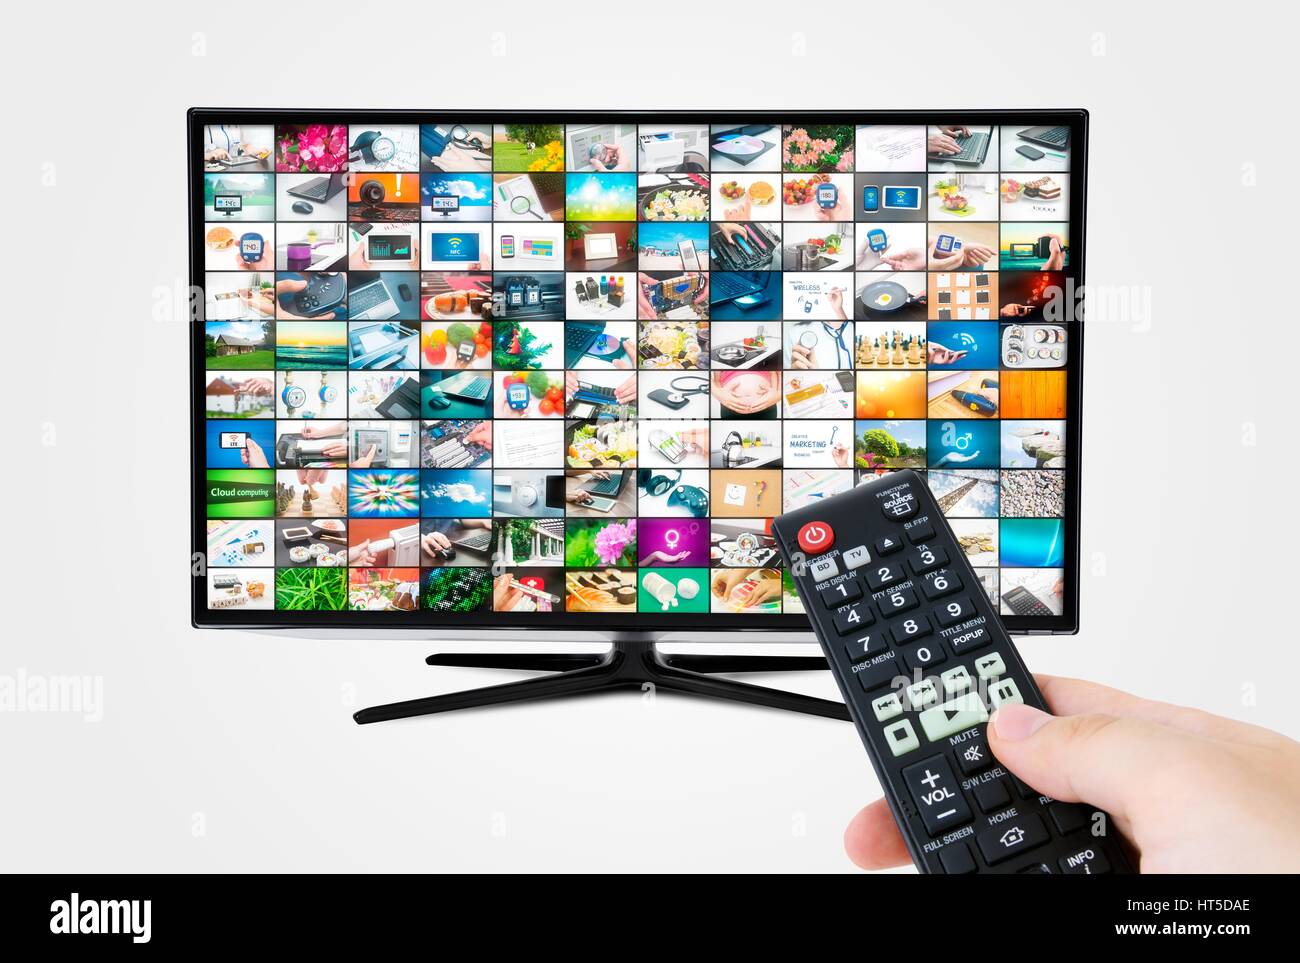 Widescreen high definition TV screen with video gallery. Remote control in hand Stock Photo